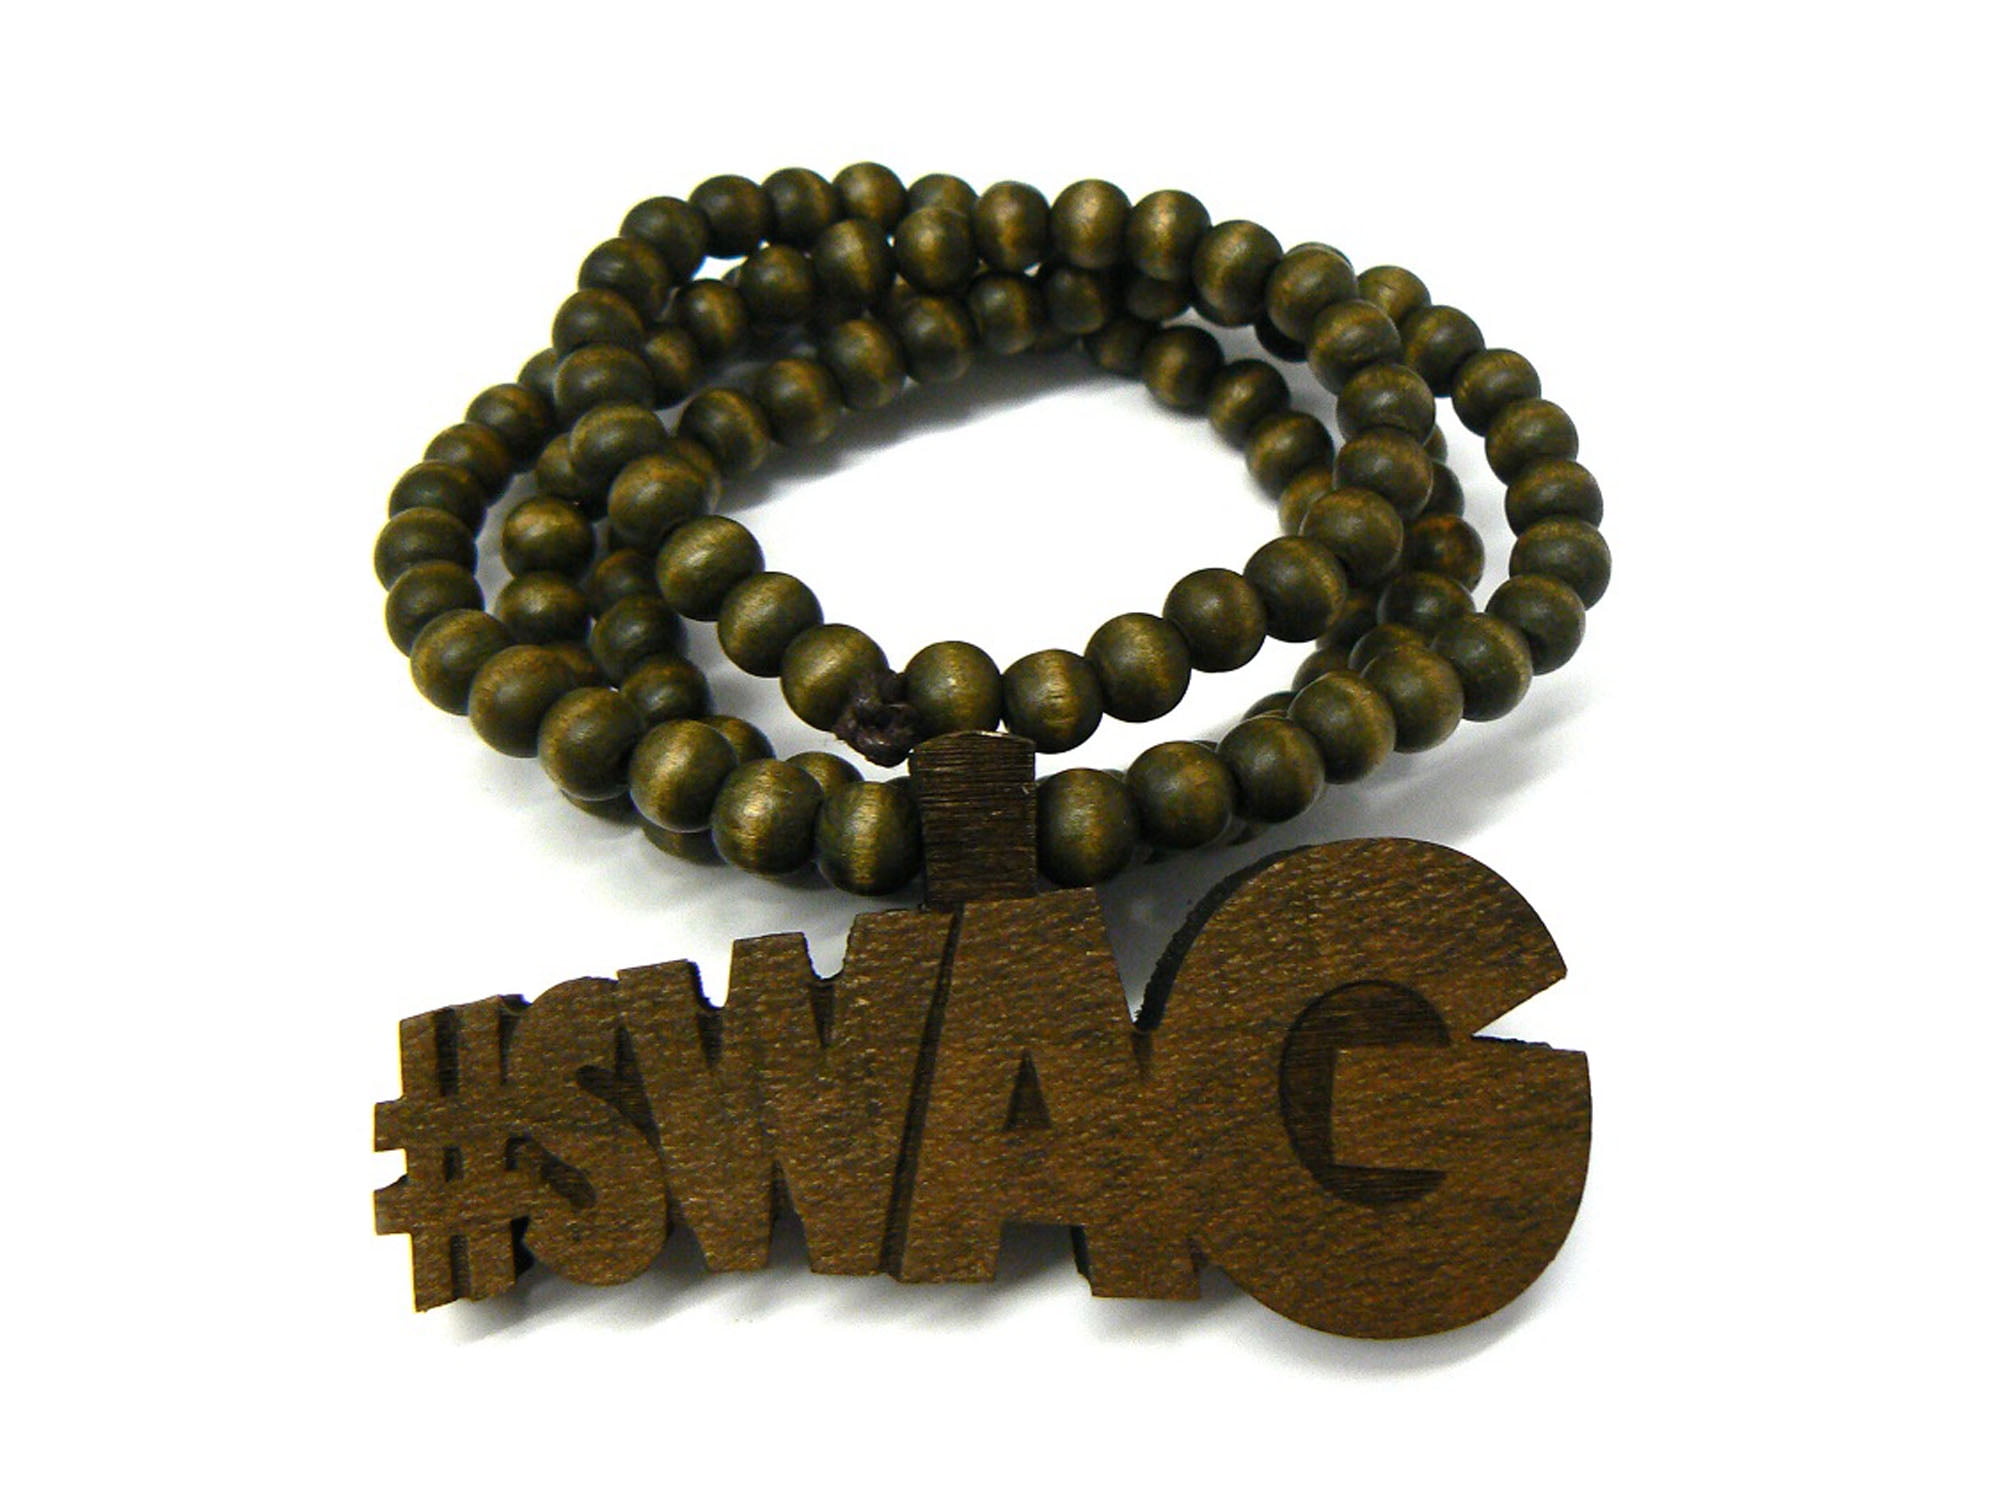 NYFASHION101 #Swag Wood Pendant 36 Wooden Bead Chain Necklace